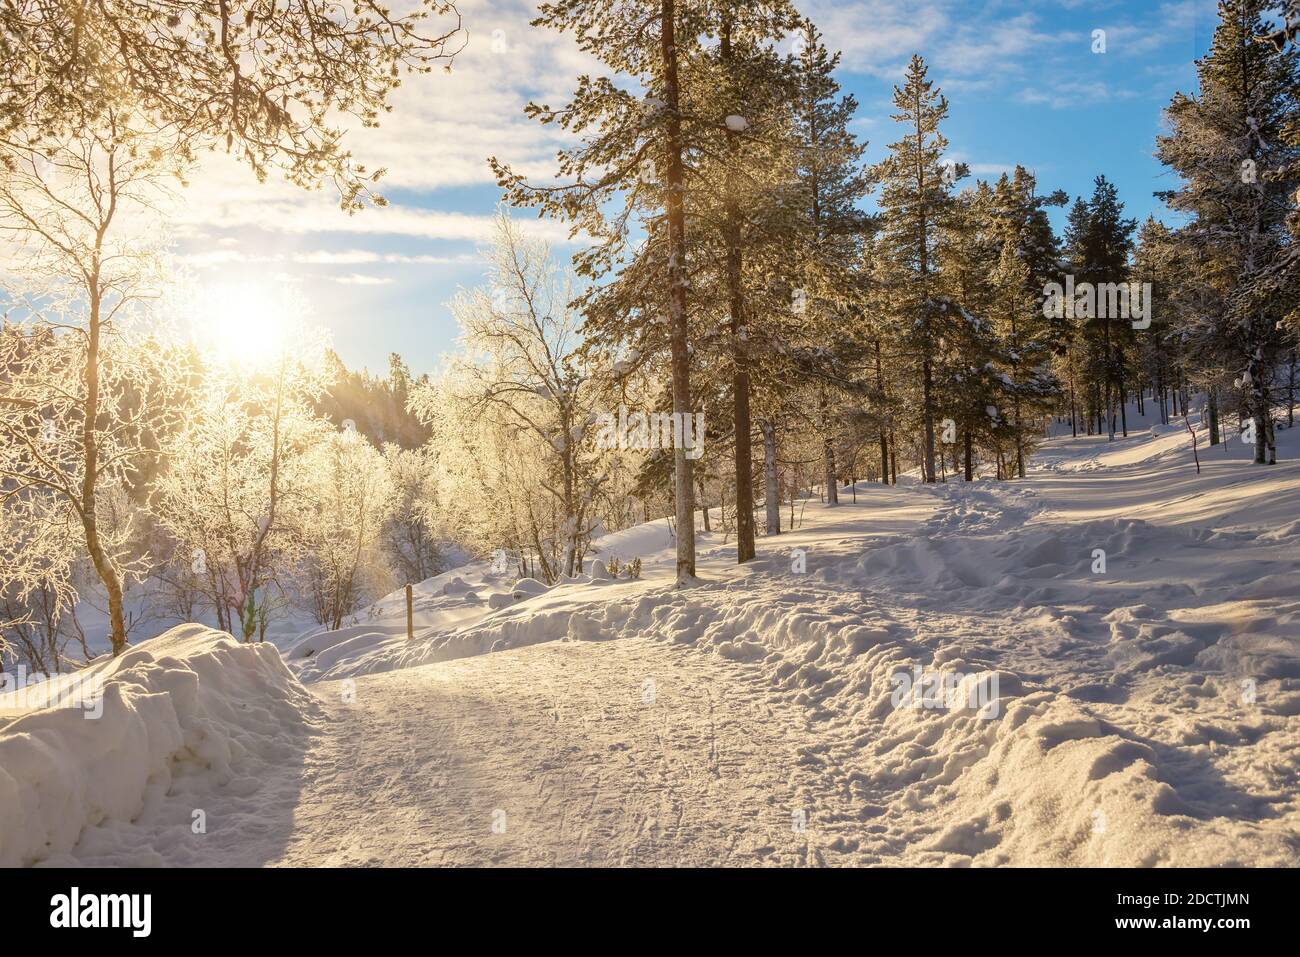 Snowy forest landscape at sunset, frozen trees in winter in Saariselka, Lapland, Finland Stock Photo